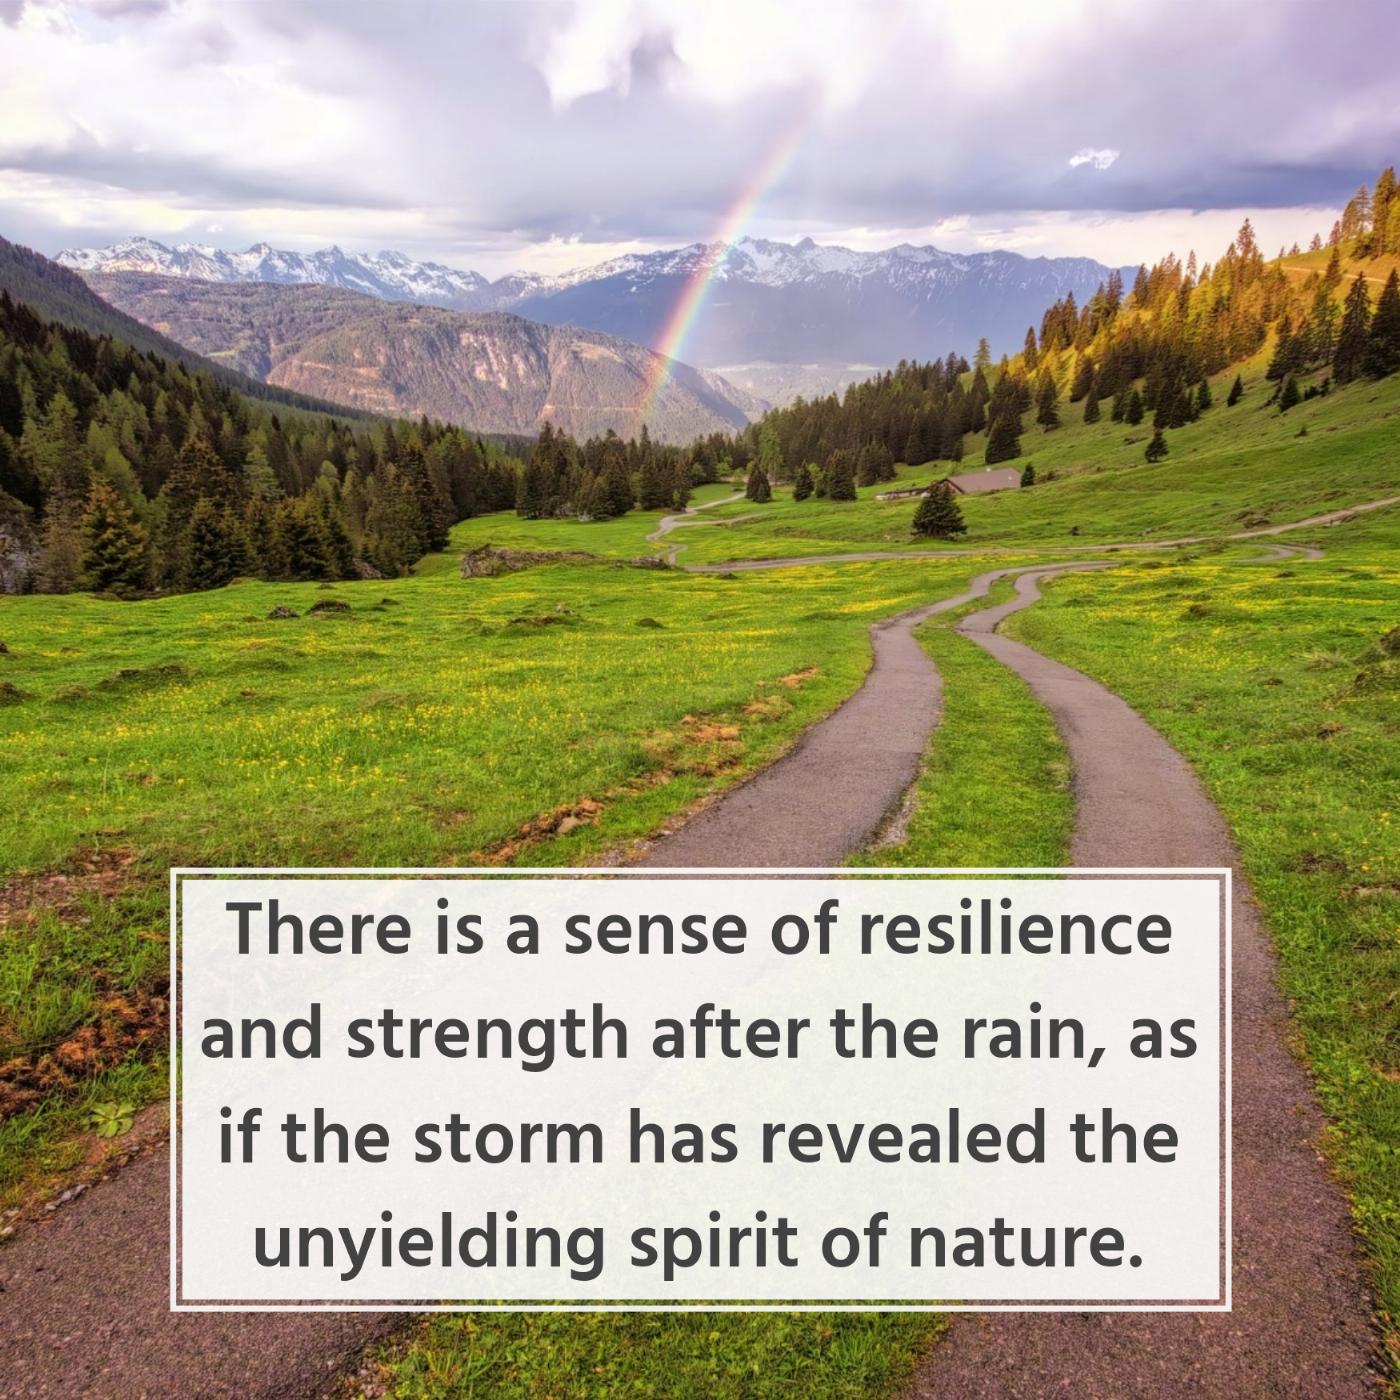 There is a sense of resilience and strength after the rain